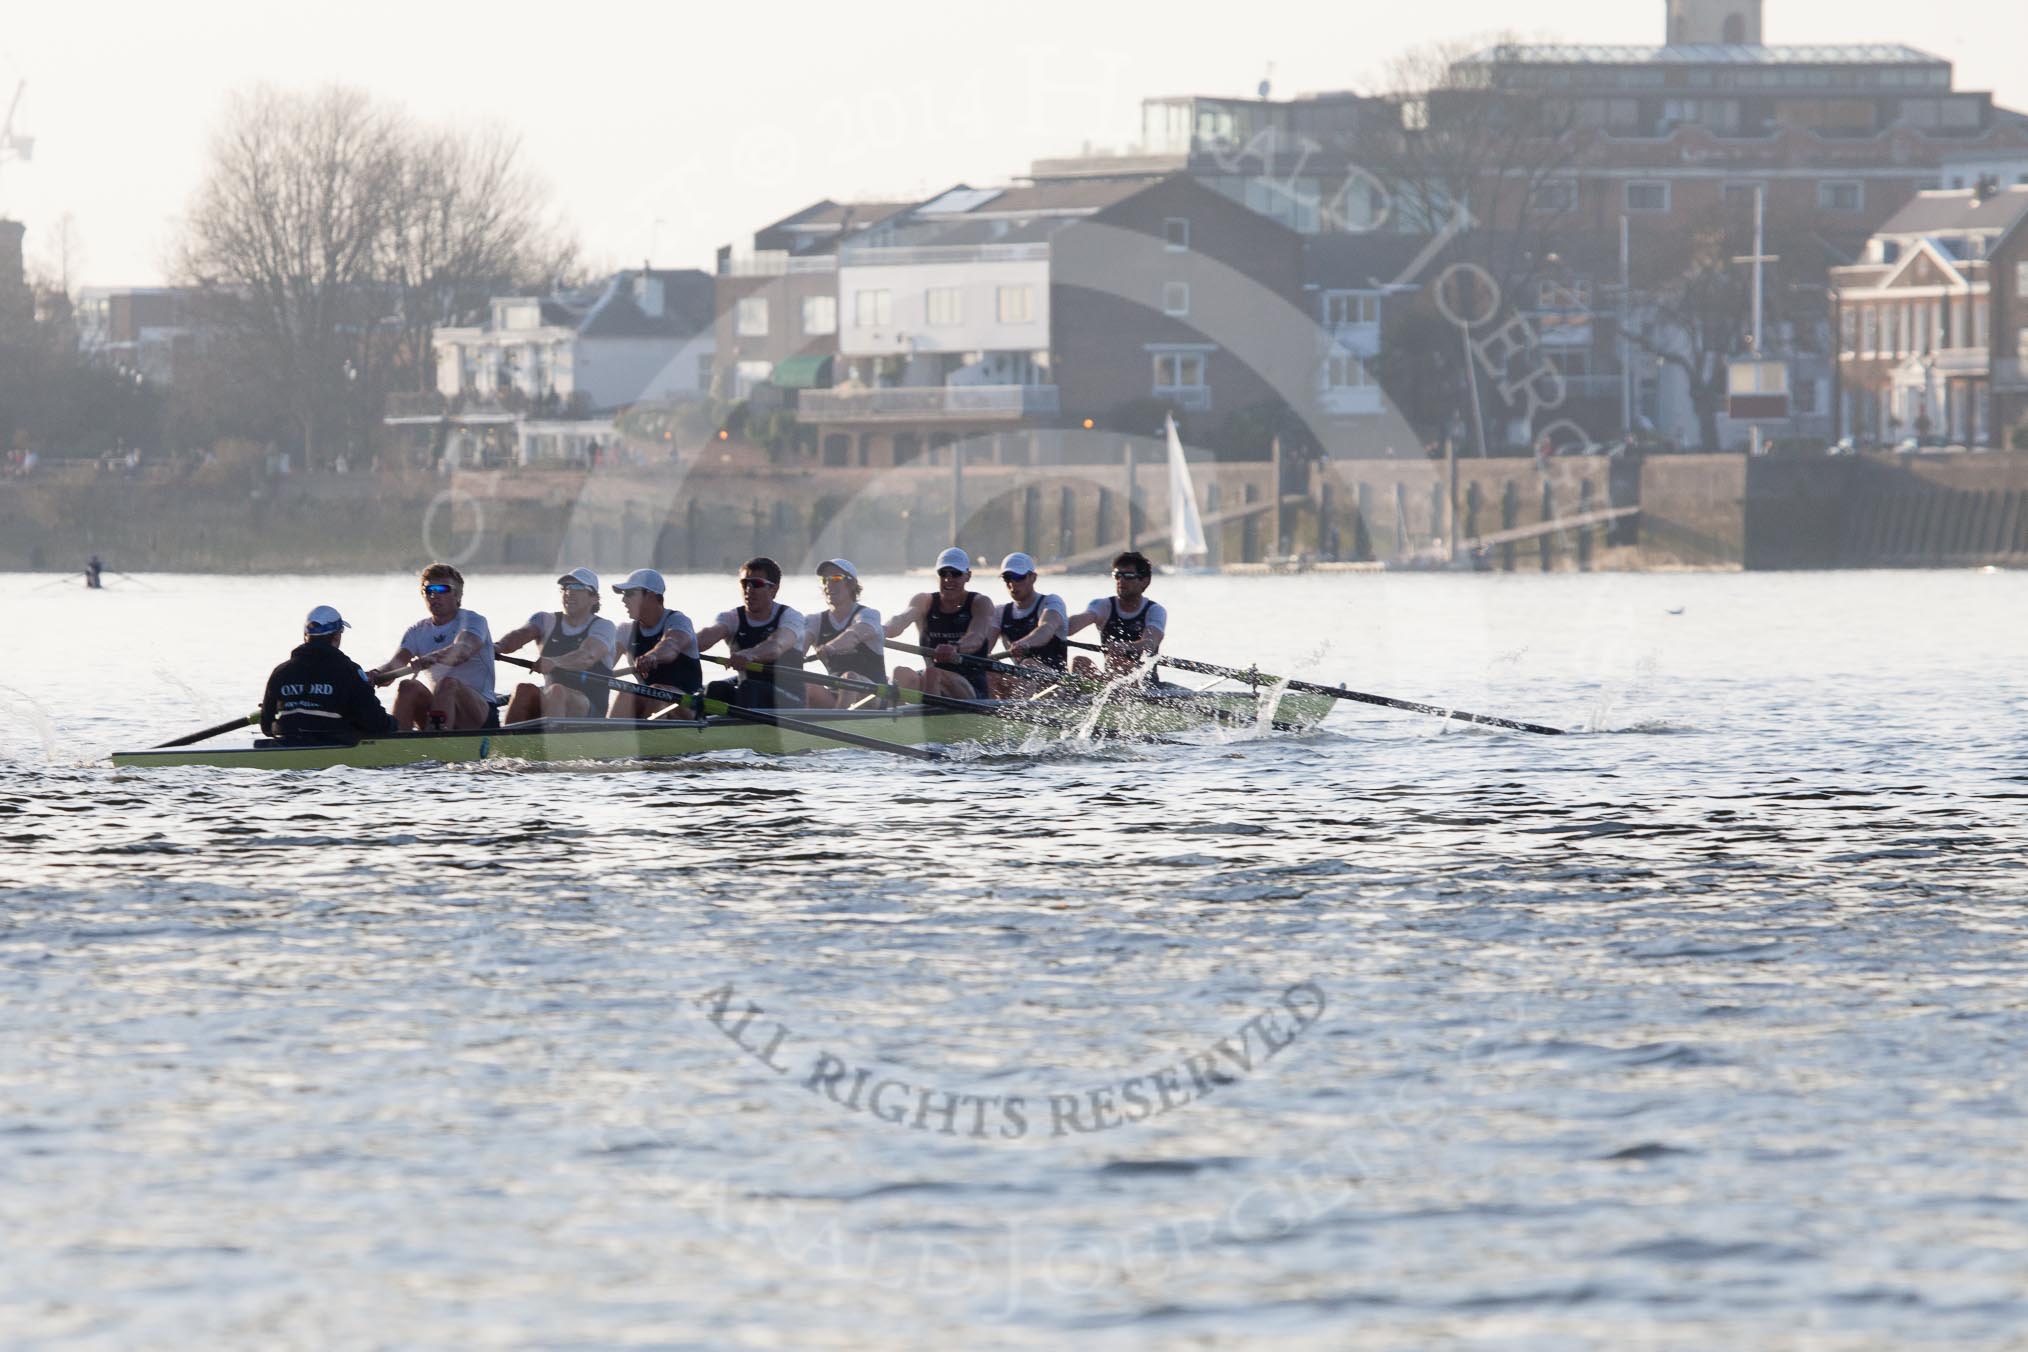 The Boat Race season 2014 - fixture OUBC vs German U23: The OUBC boat in the shadow of Hammersmith Bridge..
River Thames between Putney Bridge and Chiswick Bridge,



on 08 March 2014 at 16:53, image #117